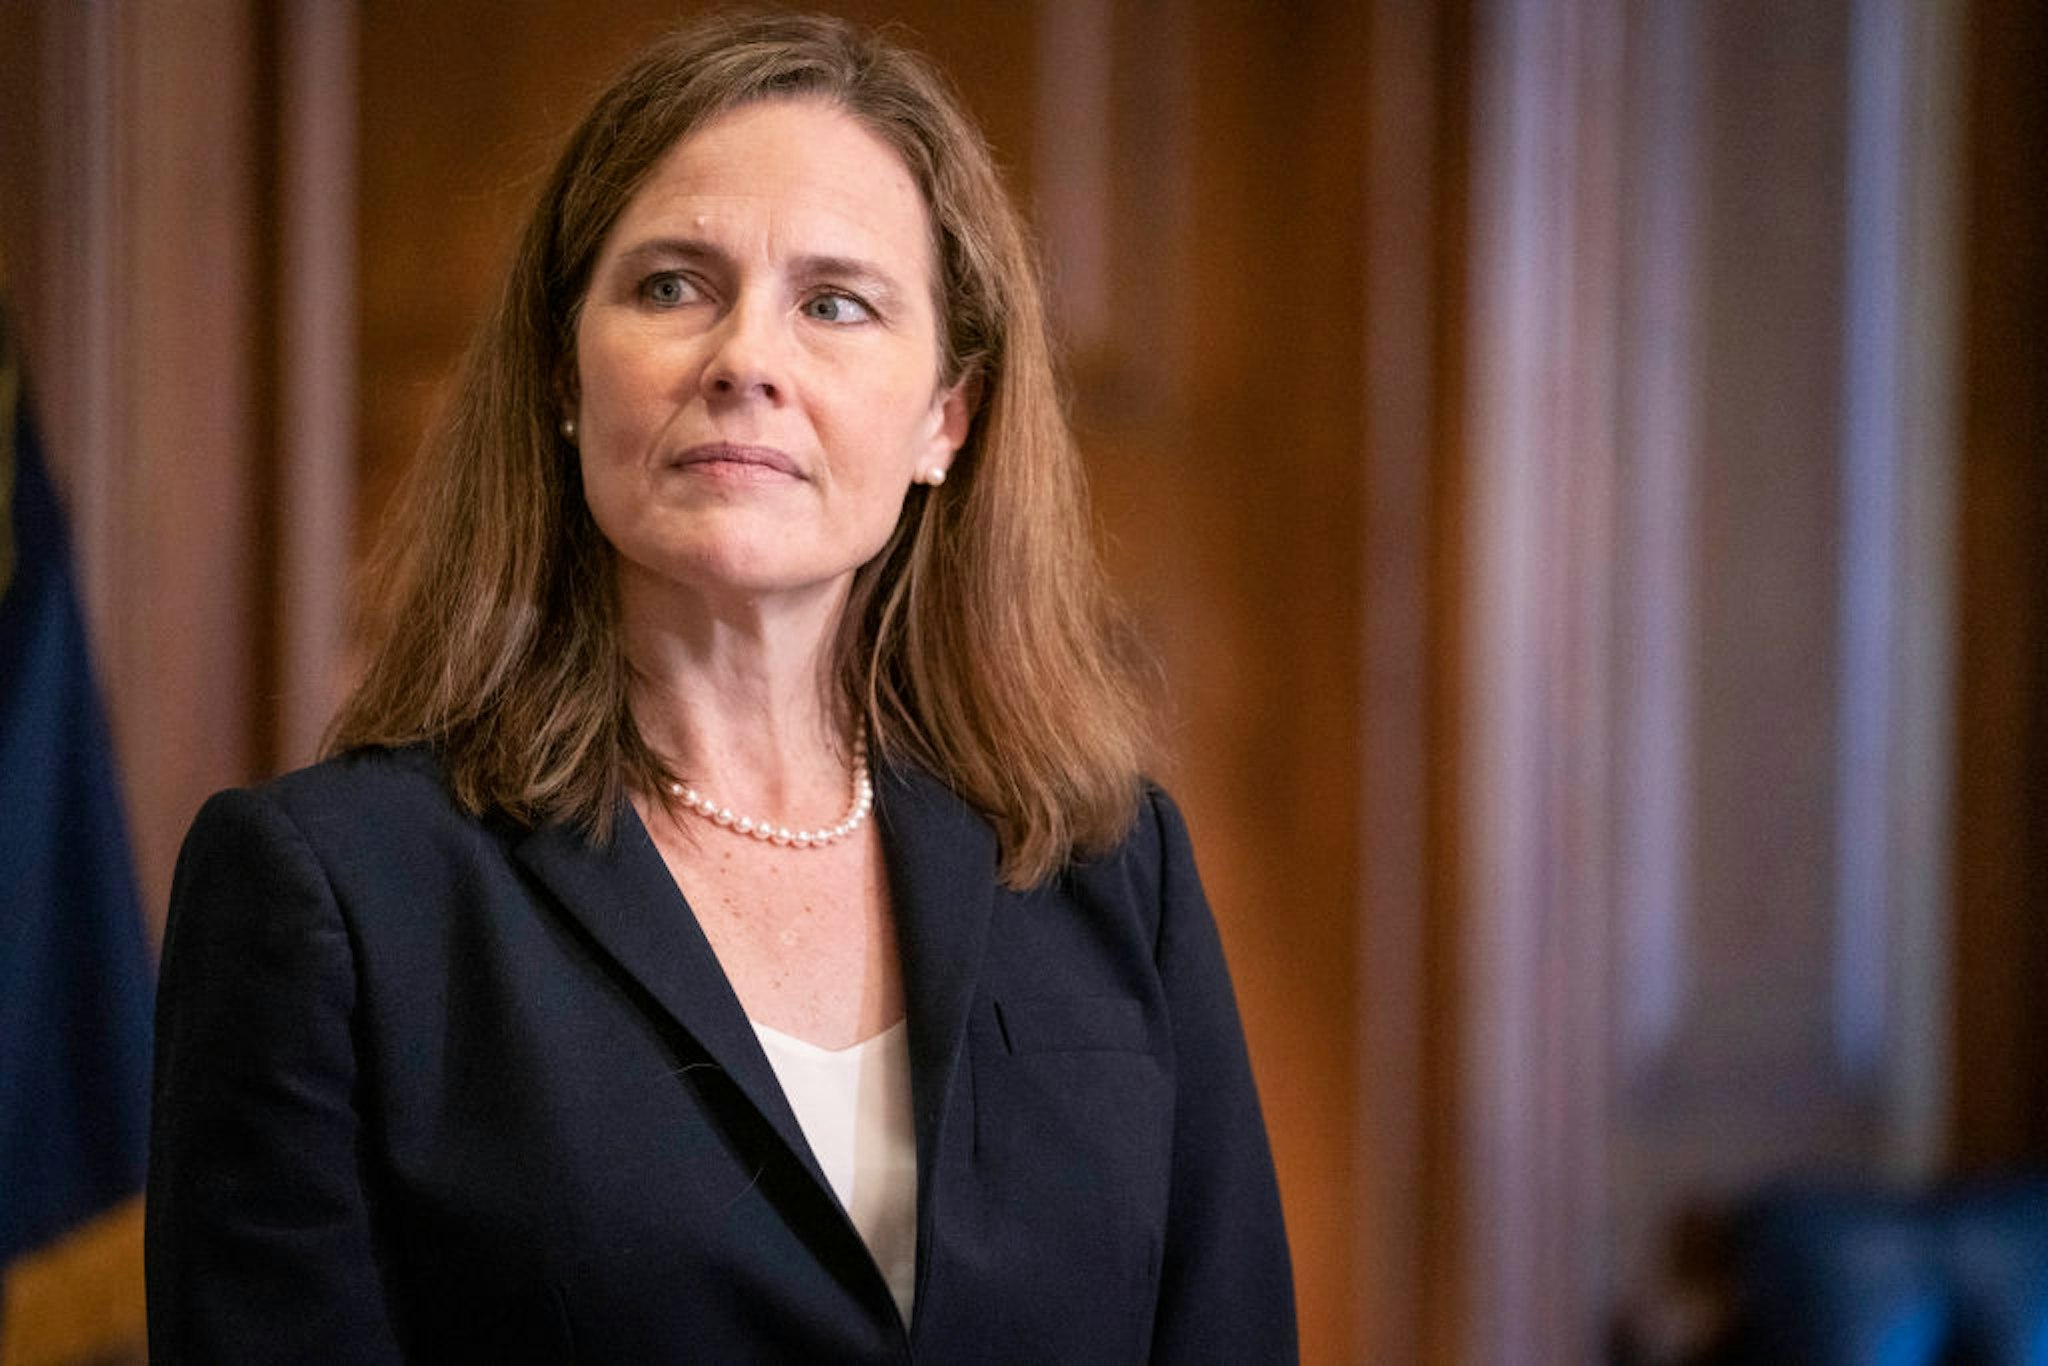 Supreme Court nominee Judge Amy Coney Barrett meets with U.S. Sen. James Lankford (R-OK) on October 21, 2020 in Washington, DC.